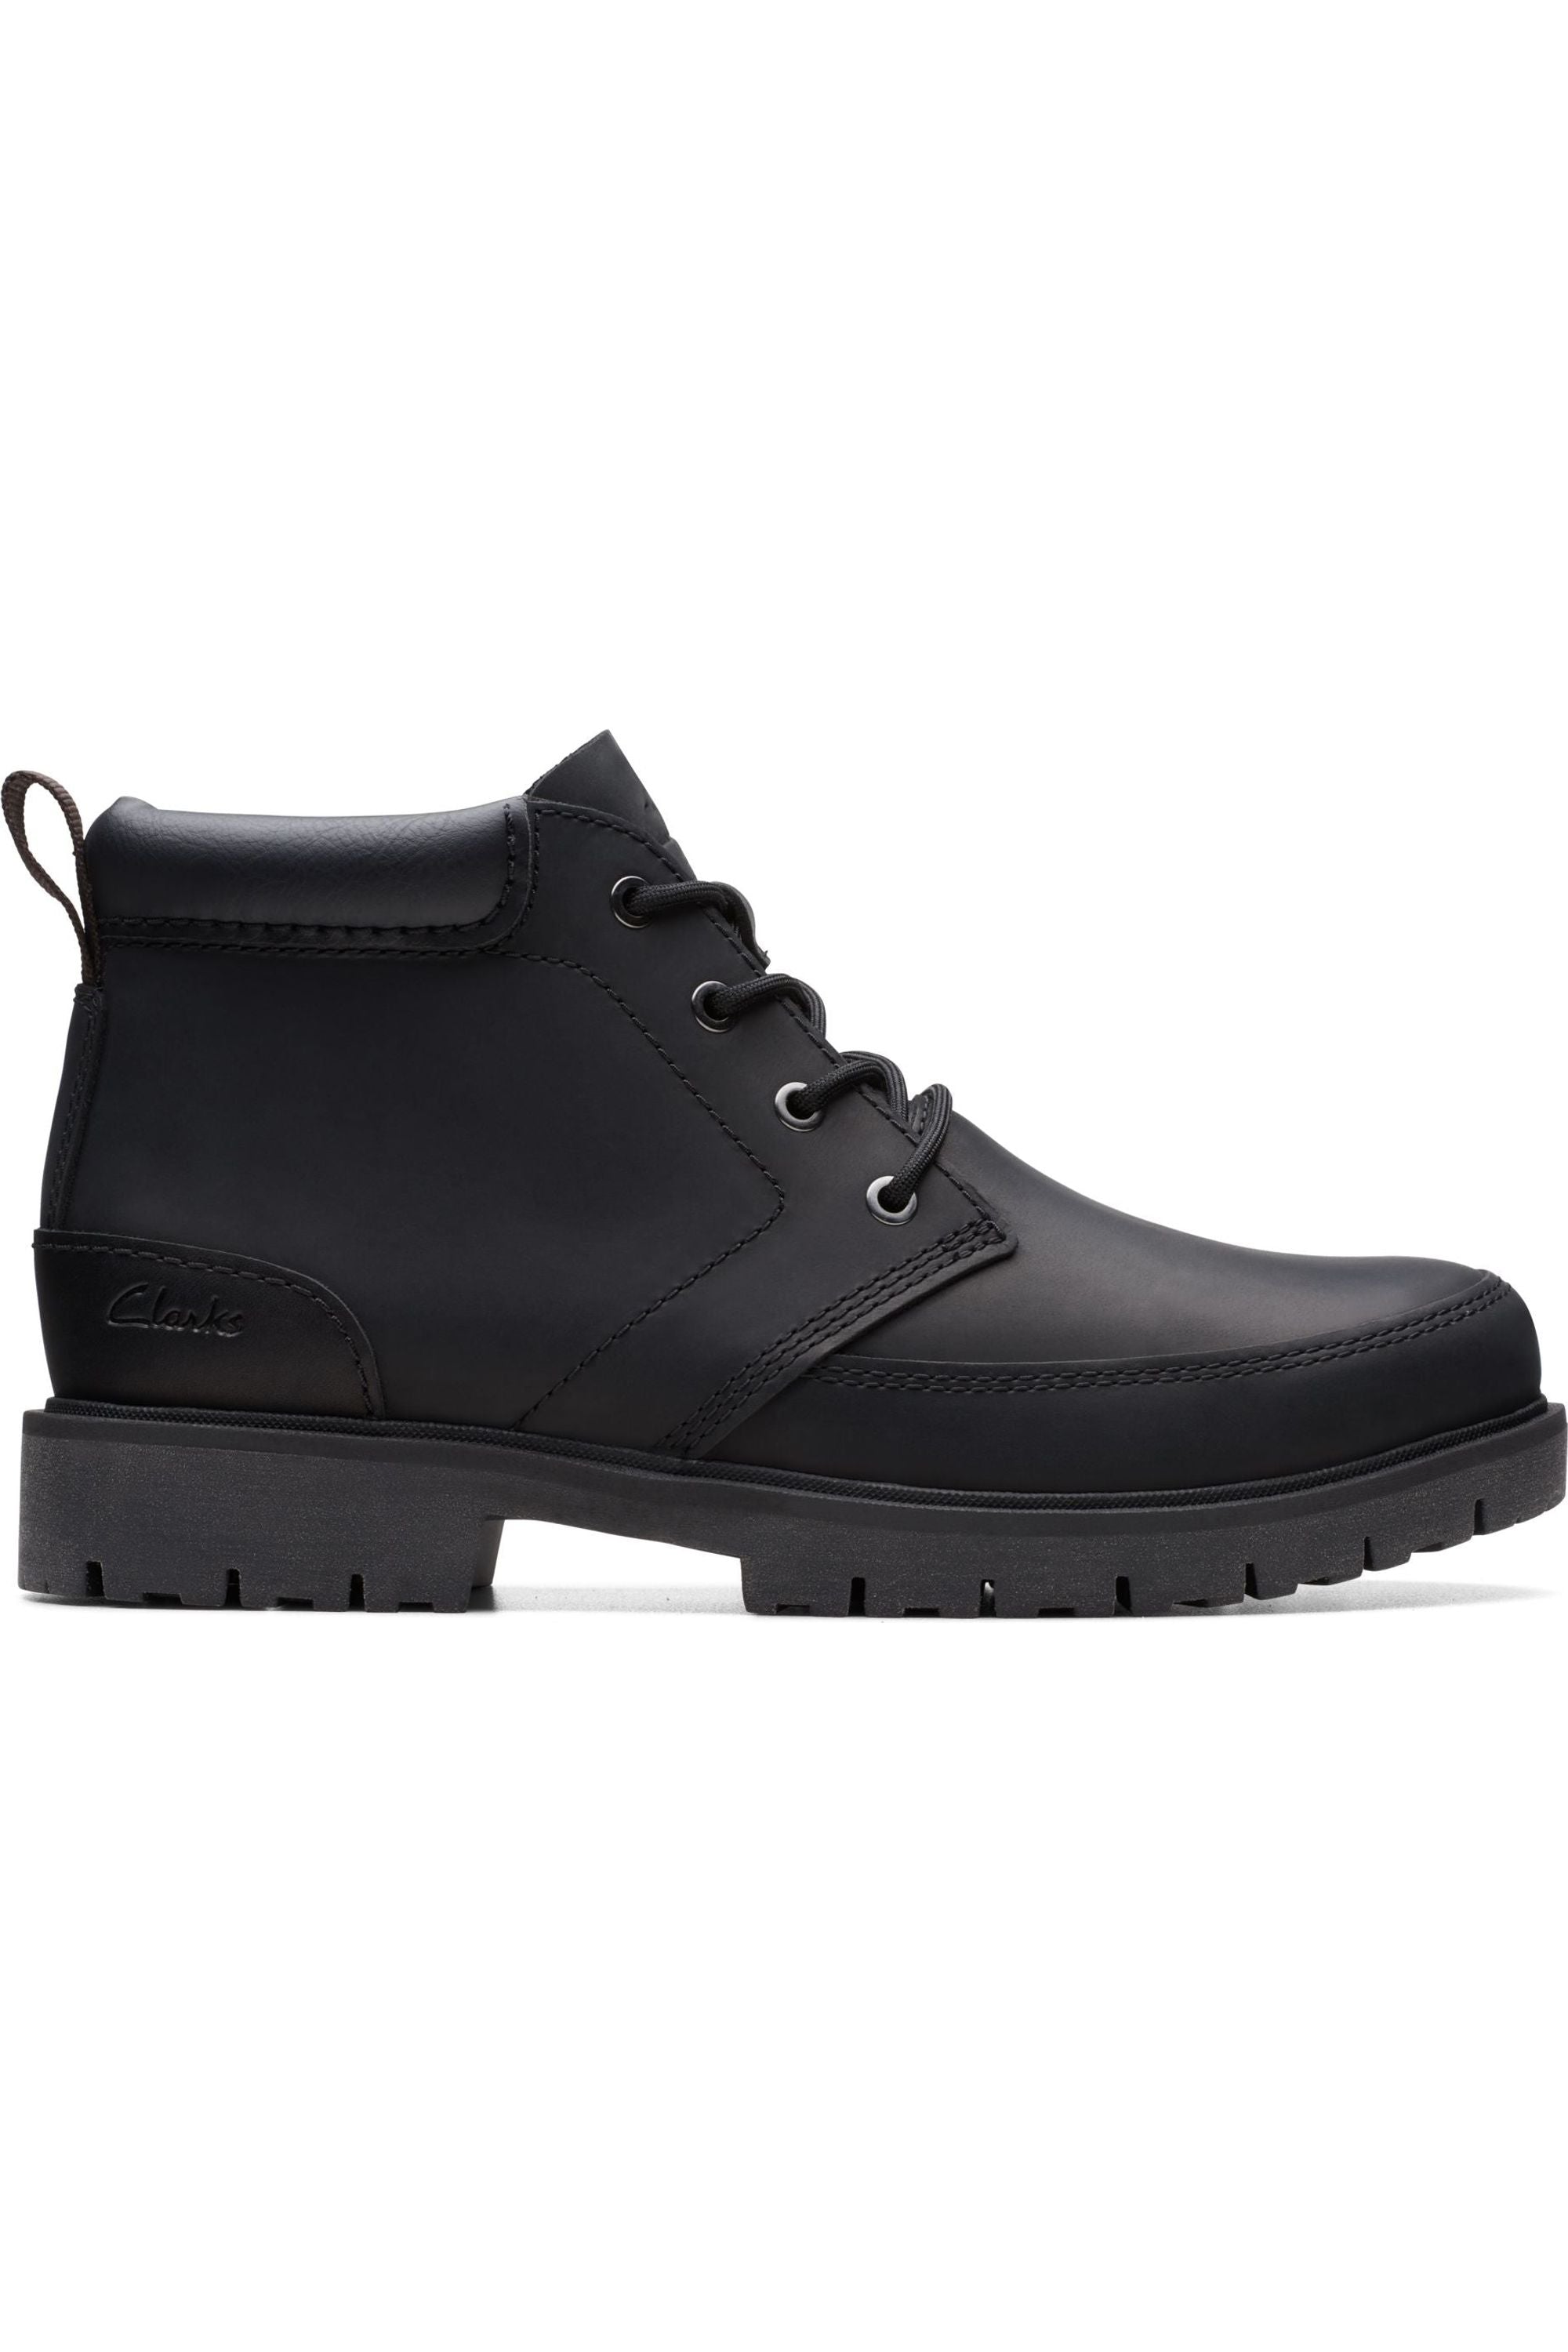 Clarks Rossdale Mid in Black Leather